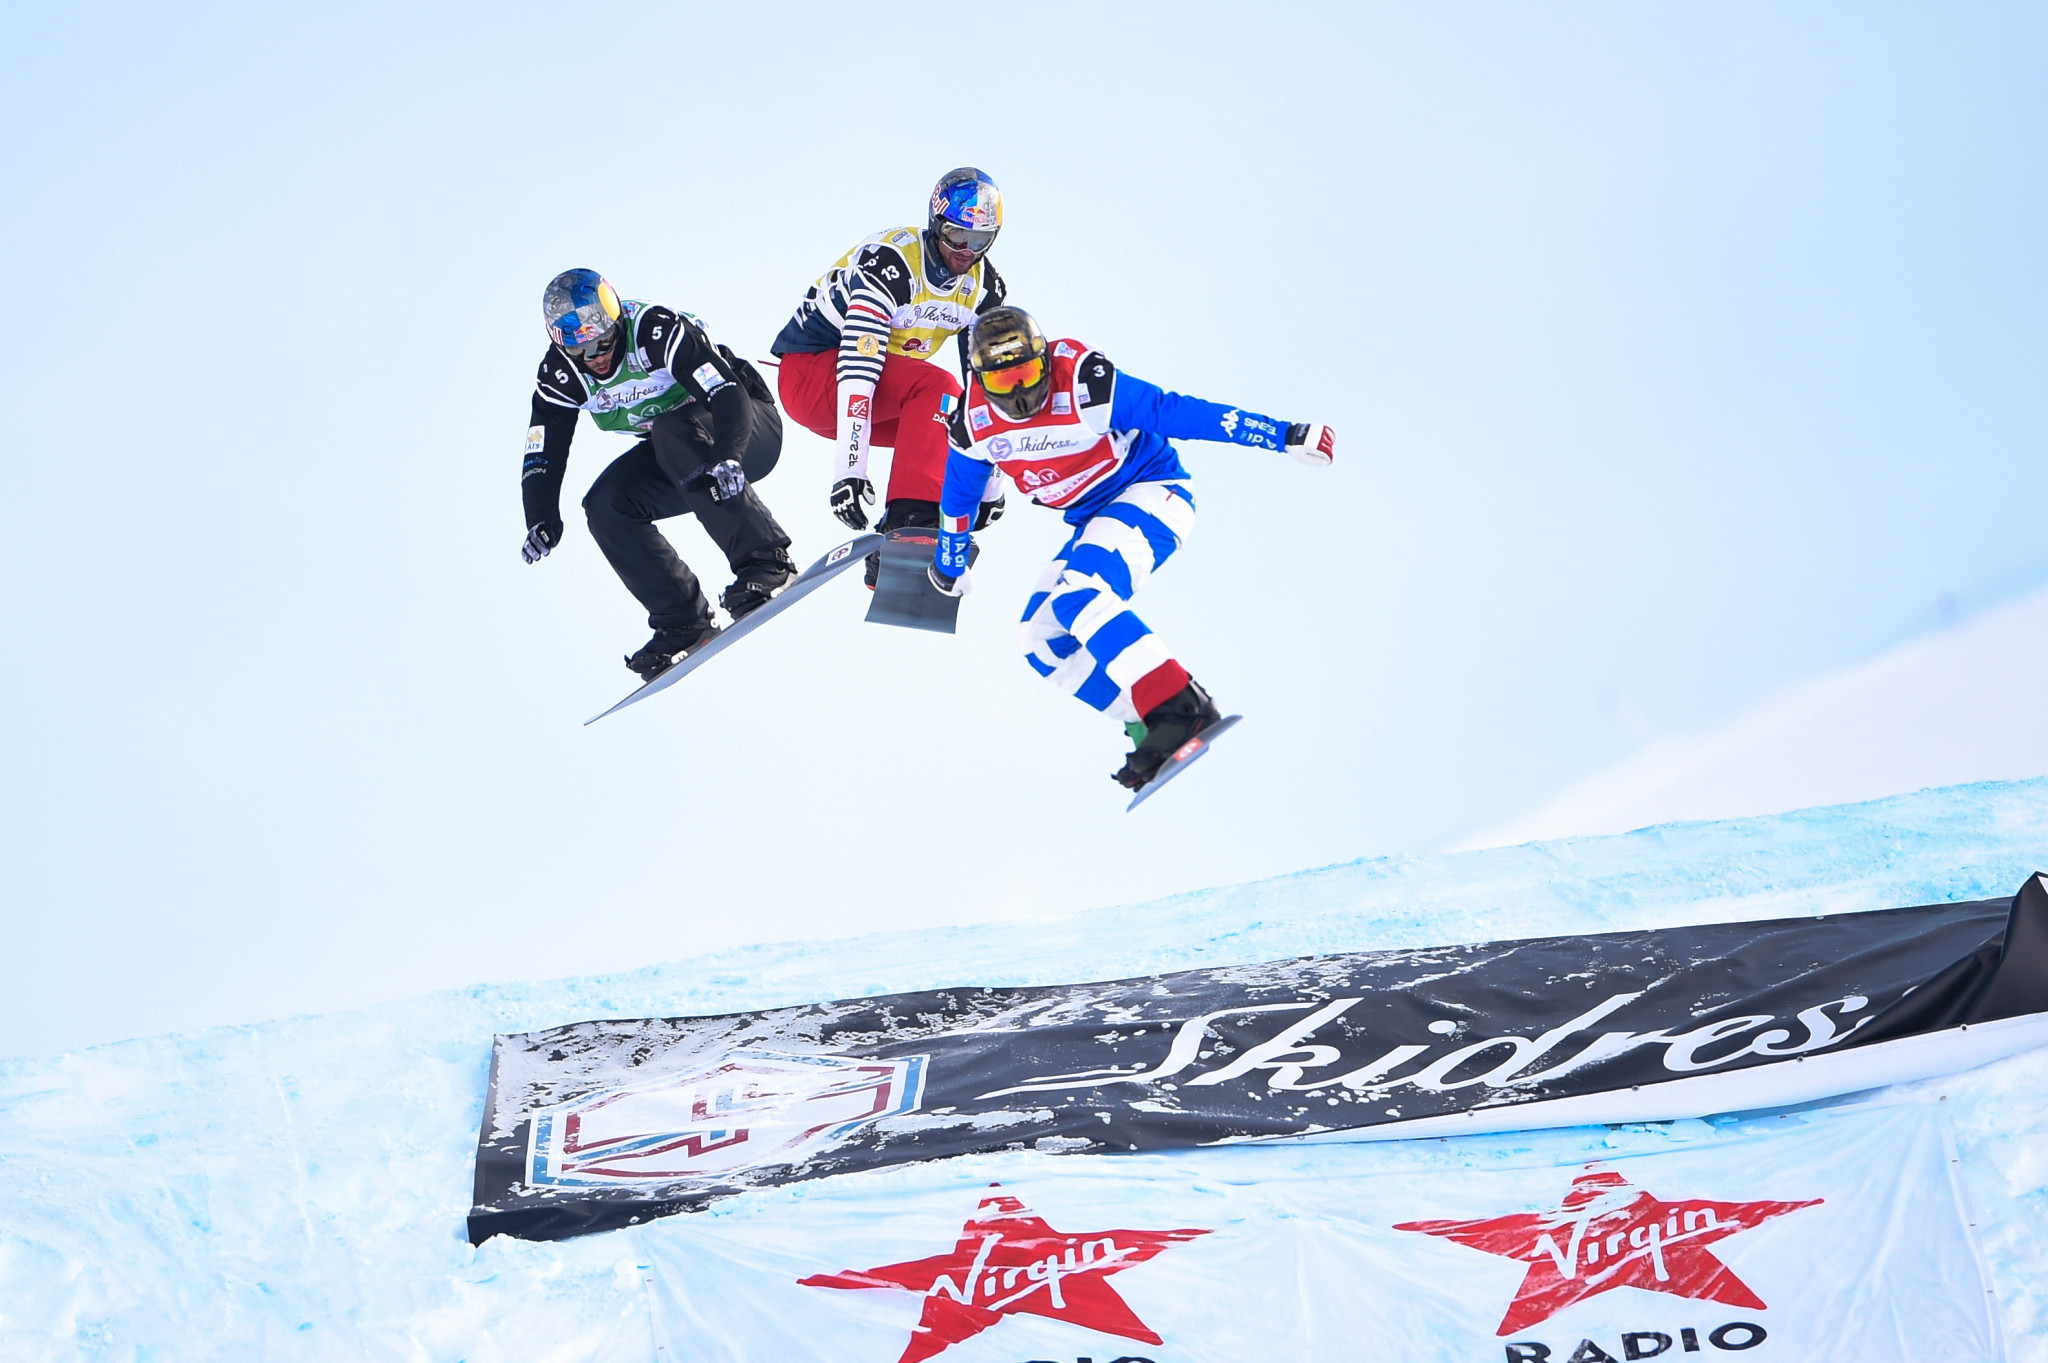 Cervinia will host the its first-ever FIS Snowboard Cross World Cup event this week ©Getty Images